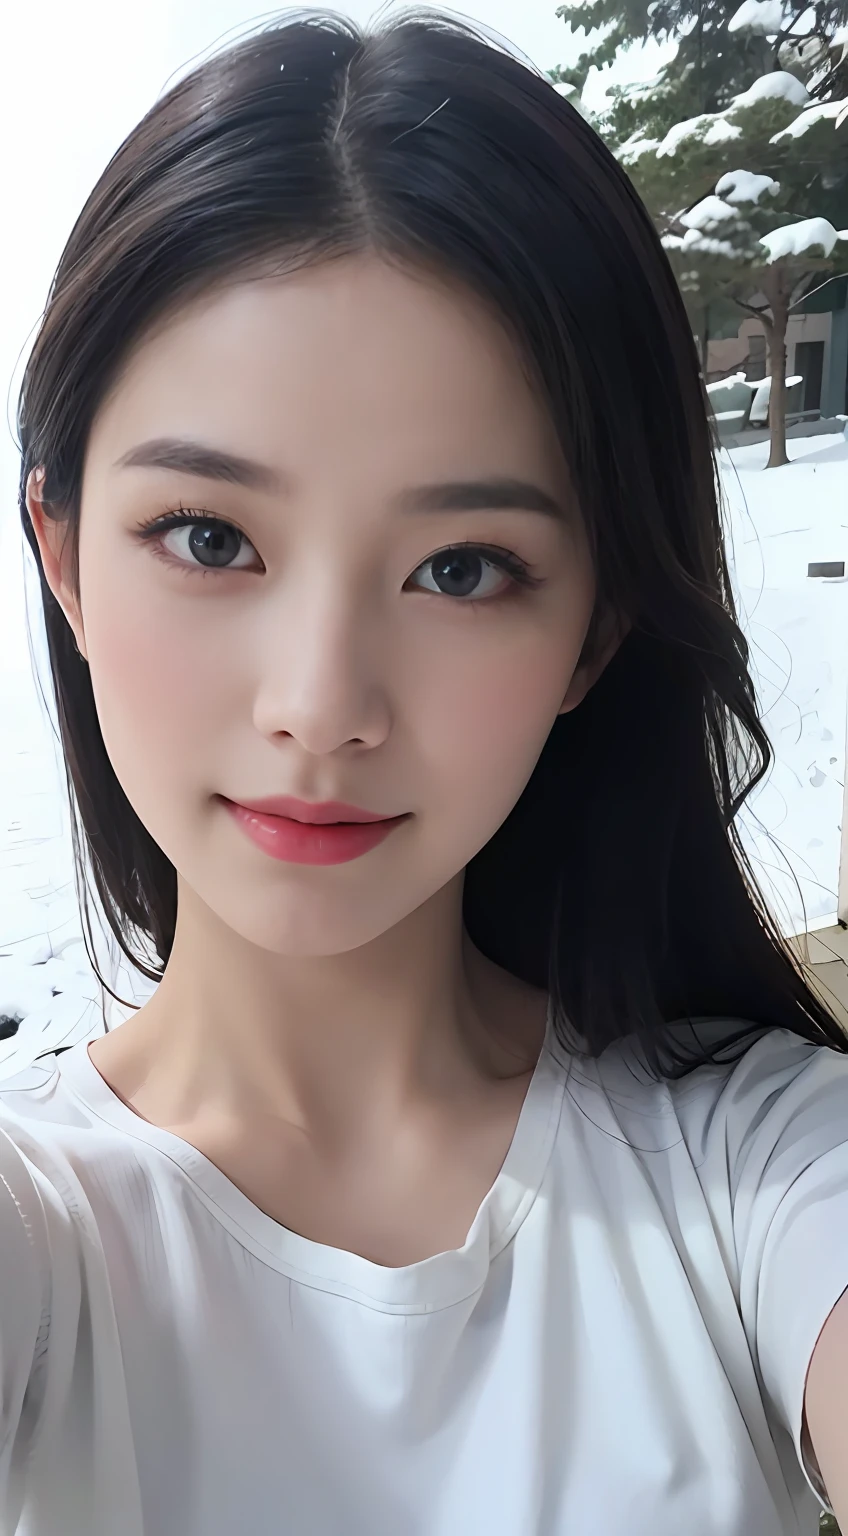 Best Quality, masutepiece, Ultra High Resolution, (Realistic: 1.4), Original photo, Head Photo, Snow White skin, Simple background, detail, Selfie, 1 girl, Looking at the viewer,